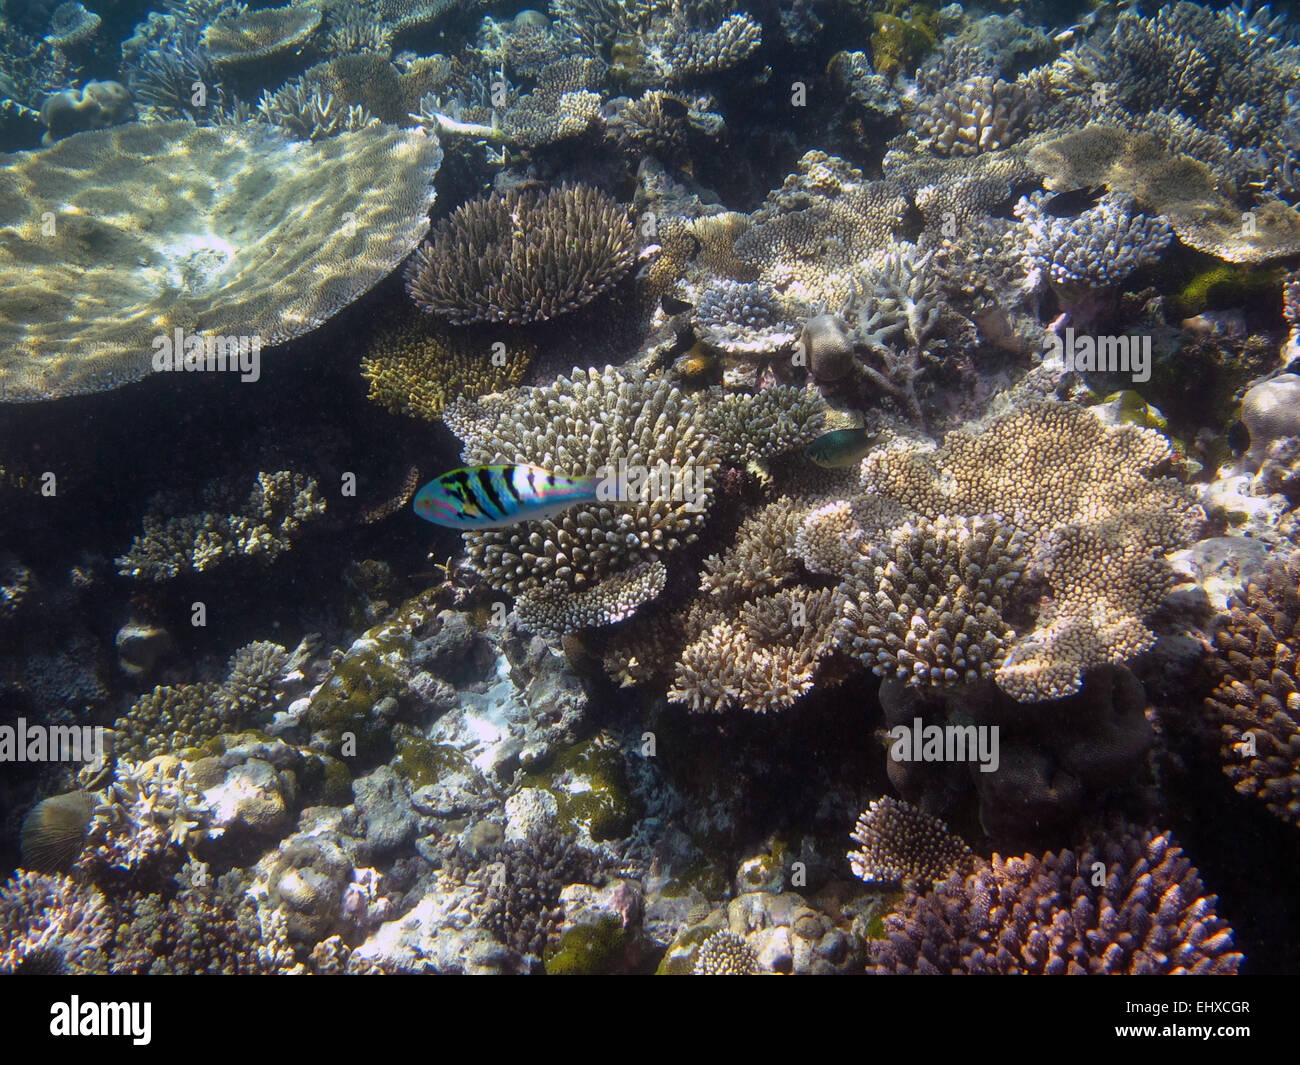 Fivestripe wrasse on a coral reef in the Maldives Stock Photo